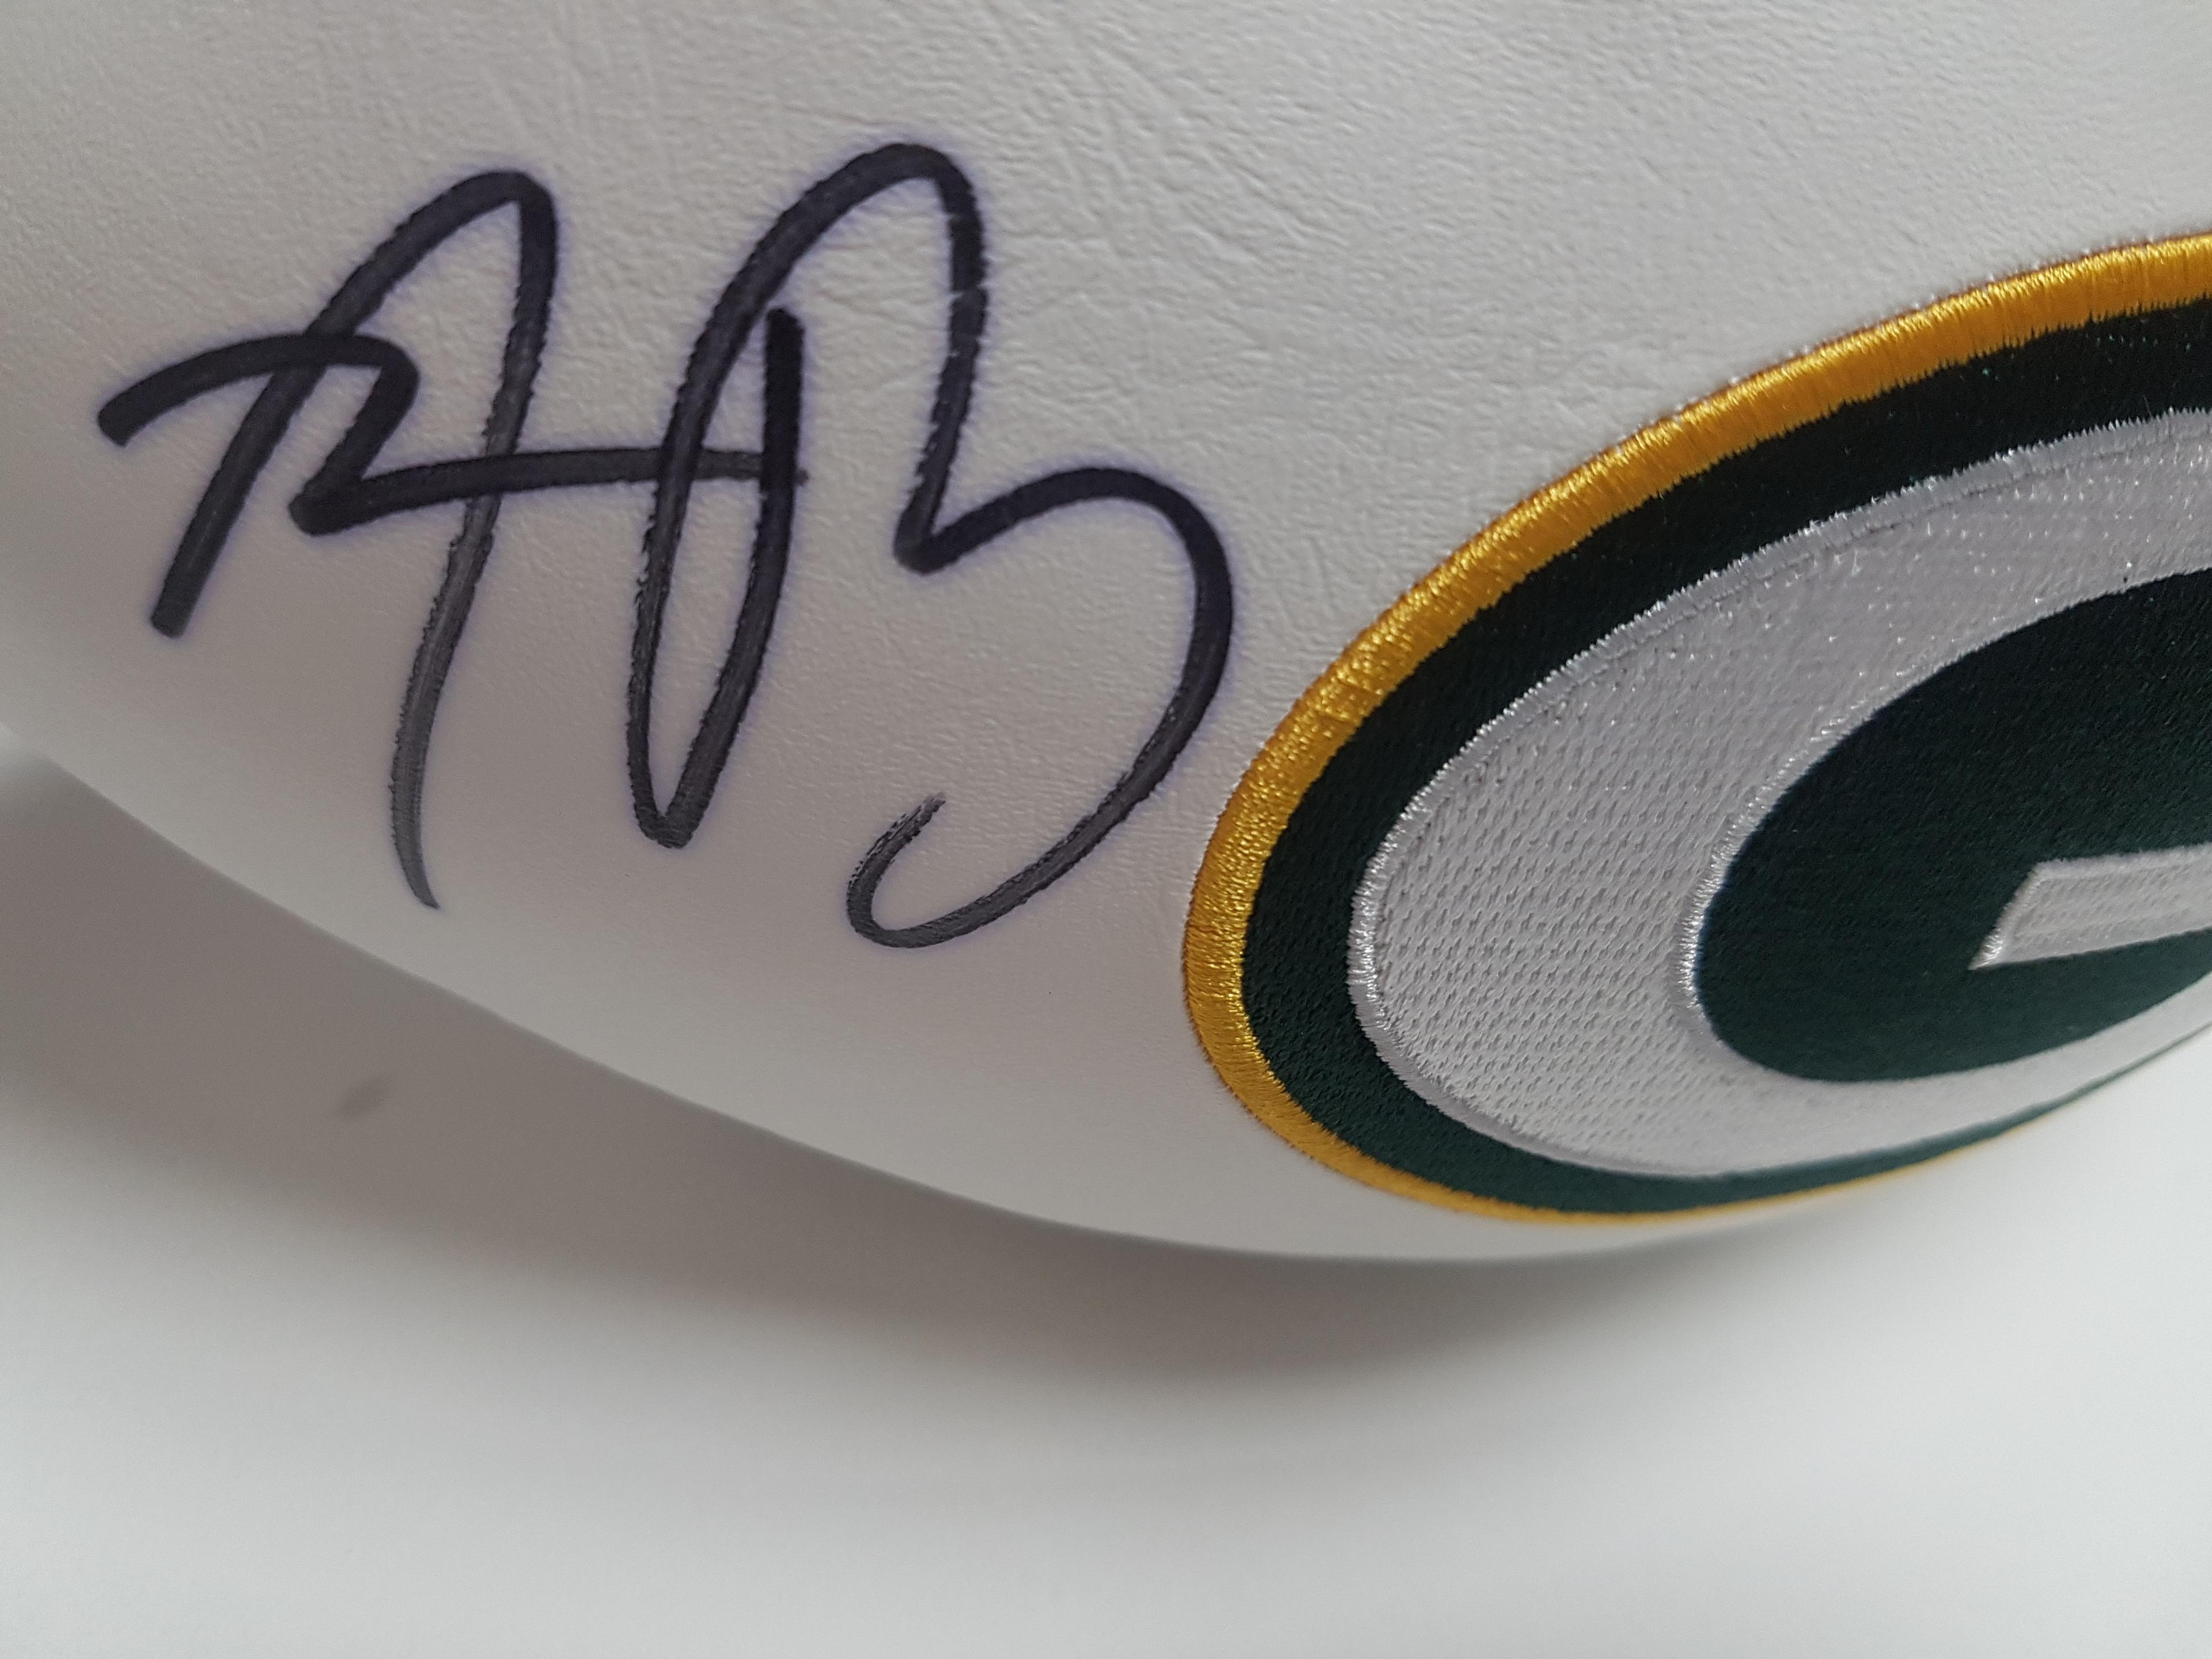 Aaron Rodgers Autographed Football With COA